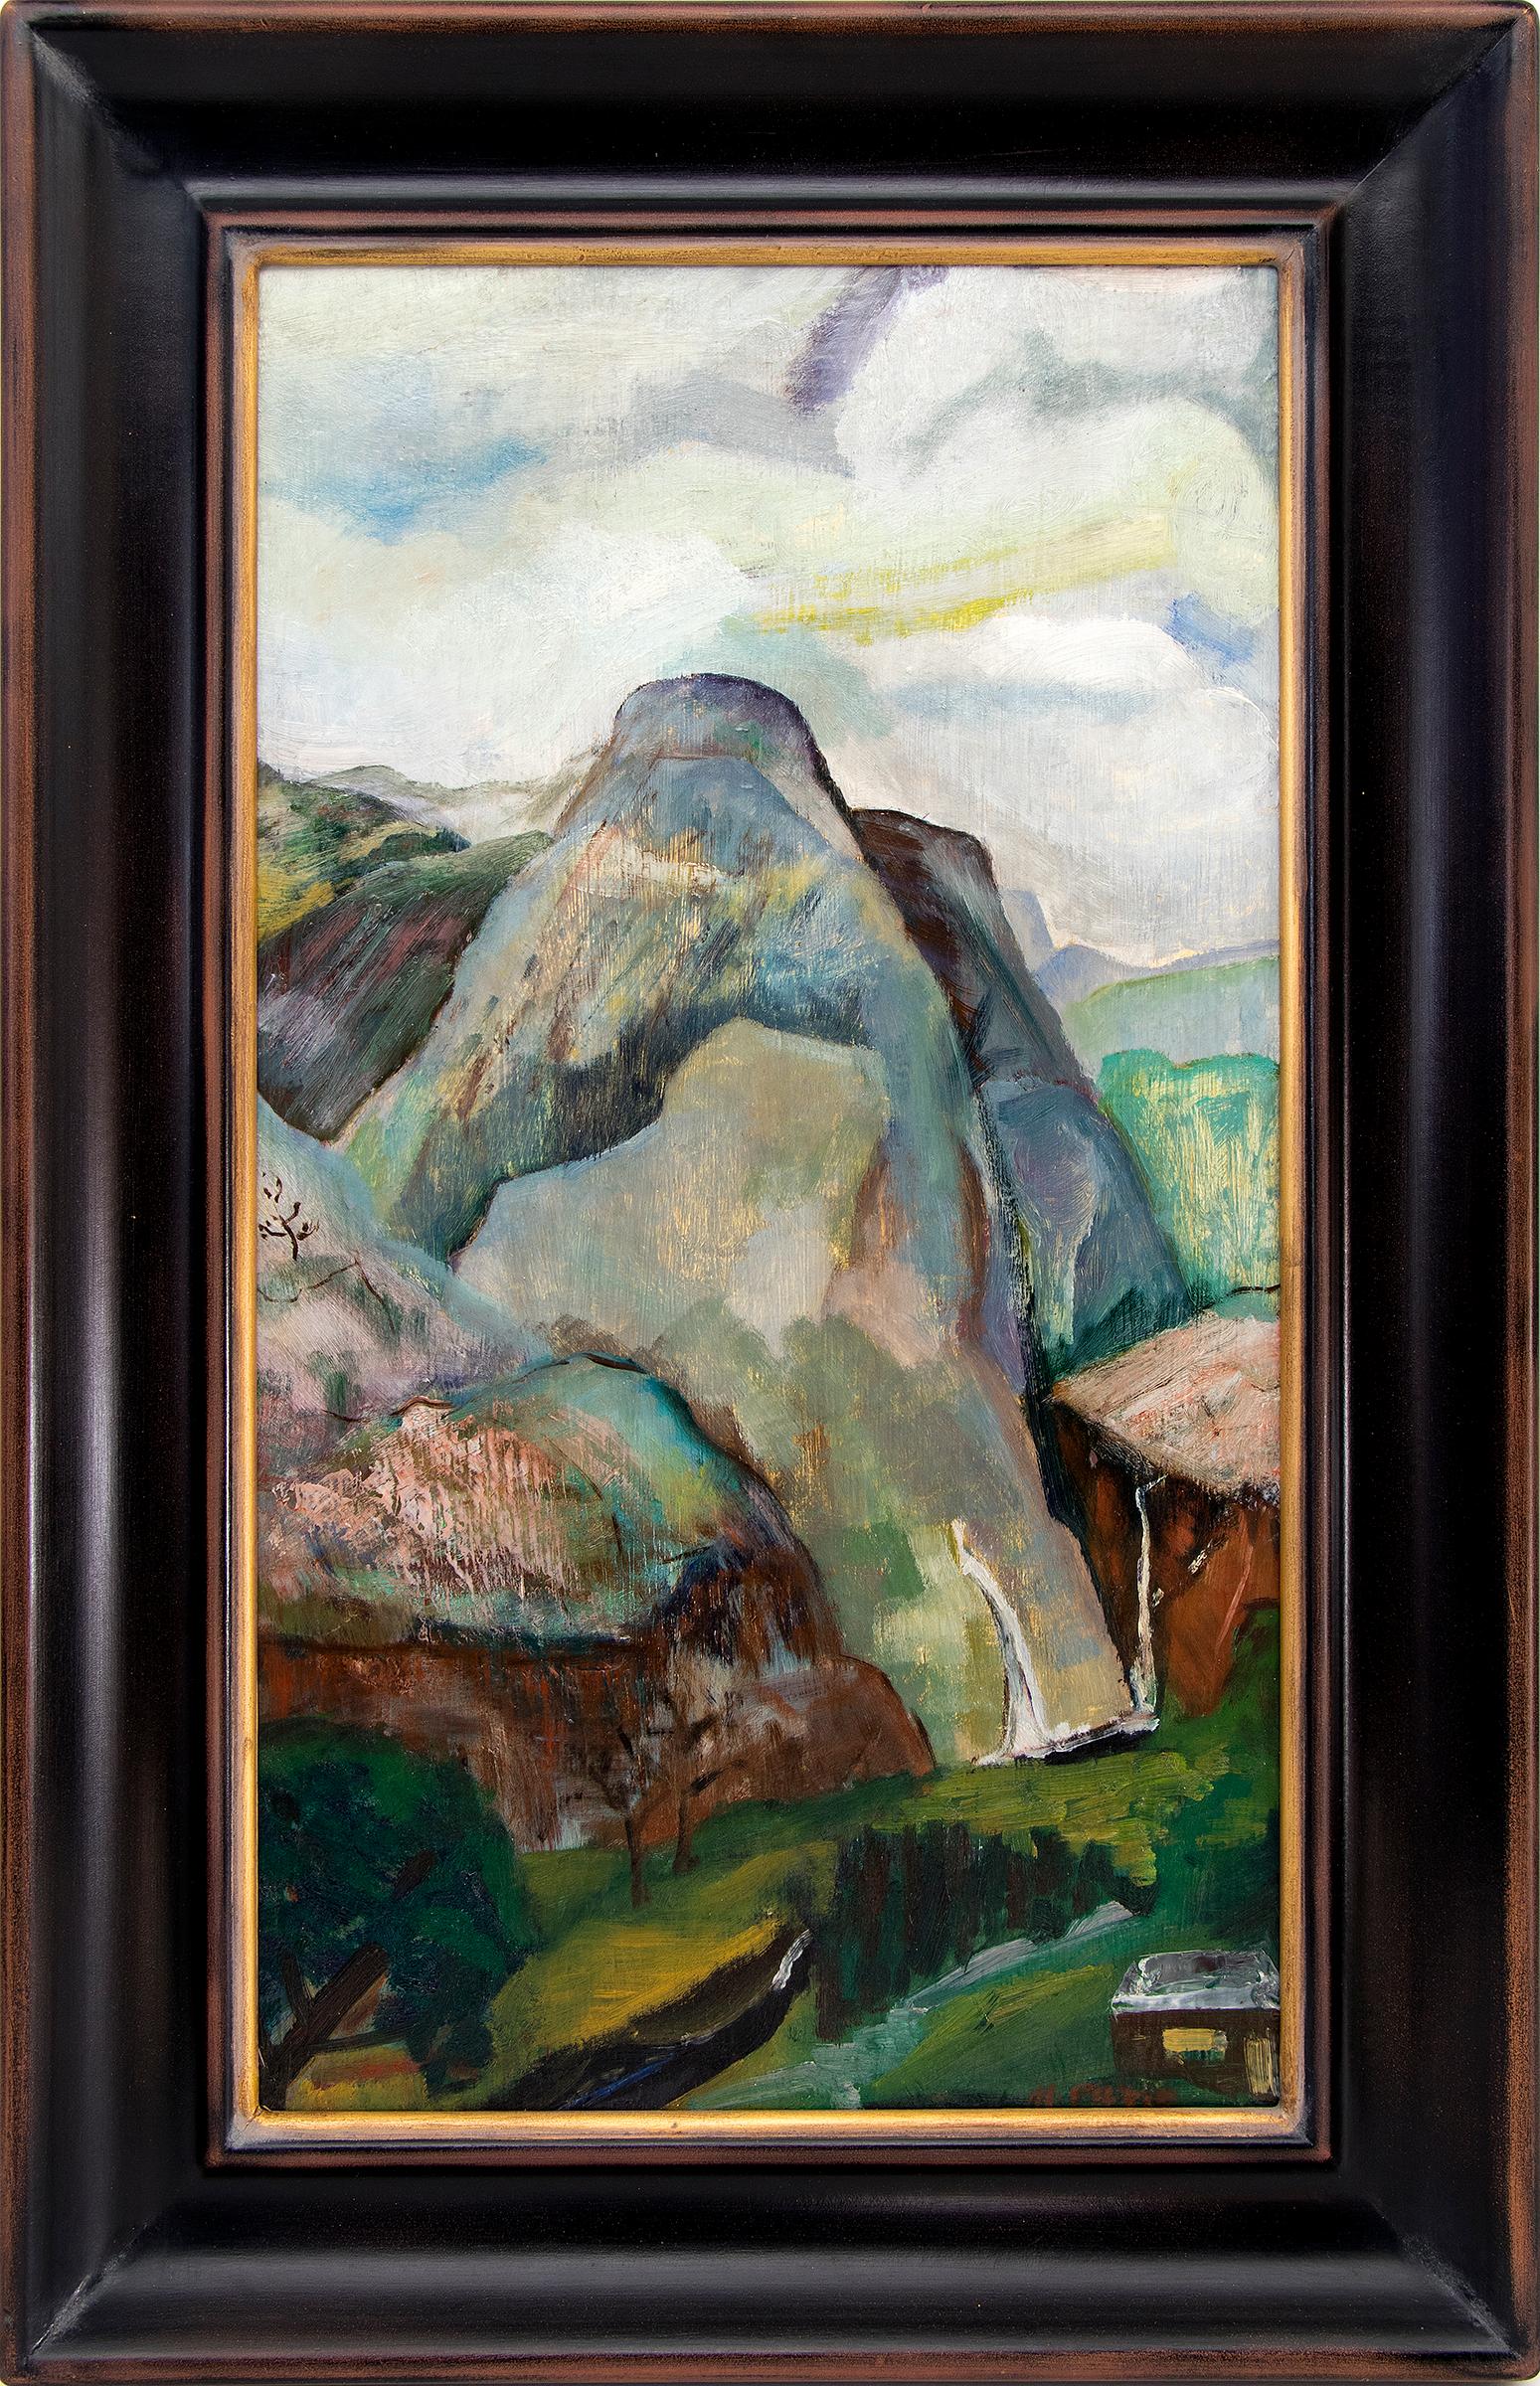 Mary Cane Robinson Landscape Painting - Mountain Landscape, Colorado Springs, Colorado, Framed Landscape Oil Painting